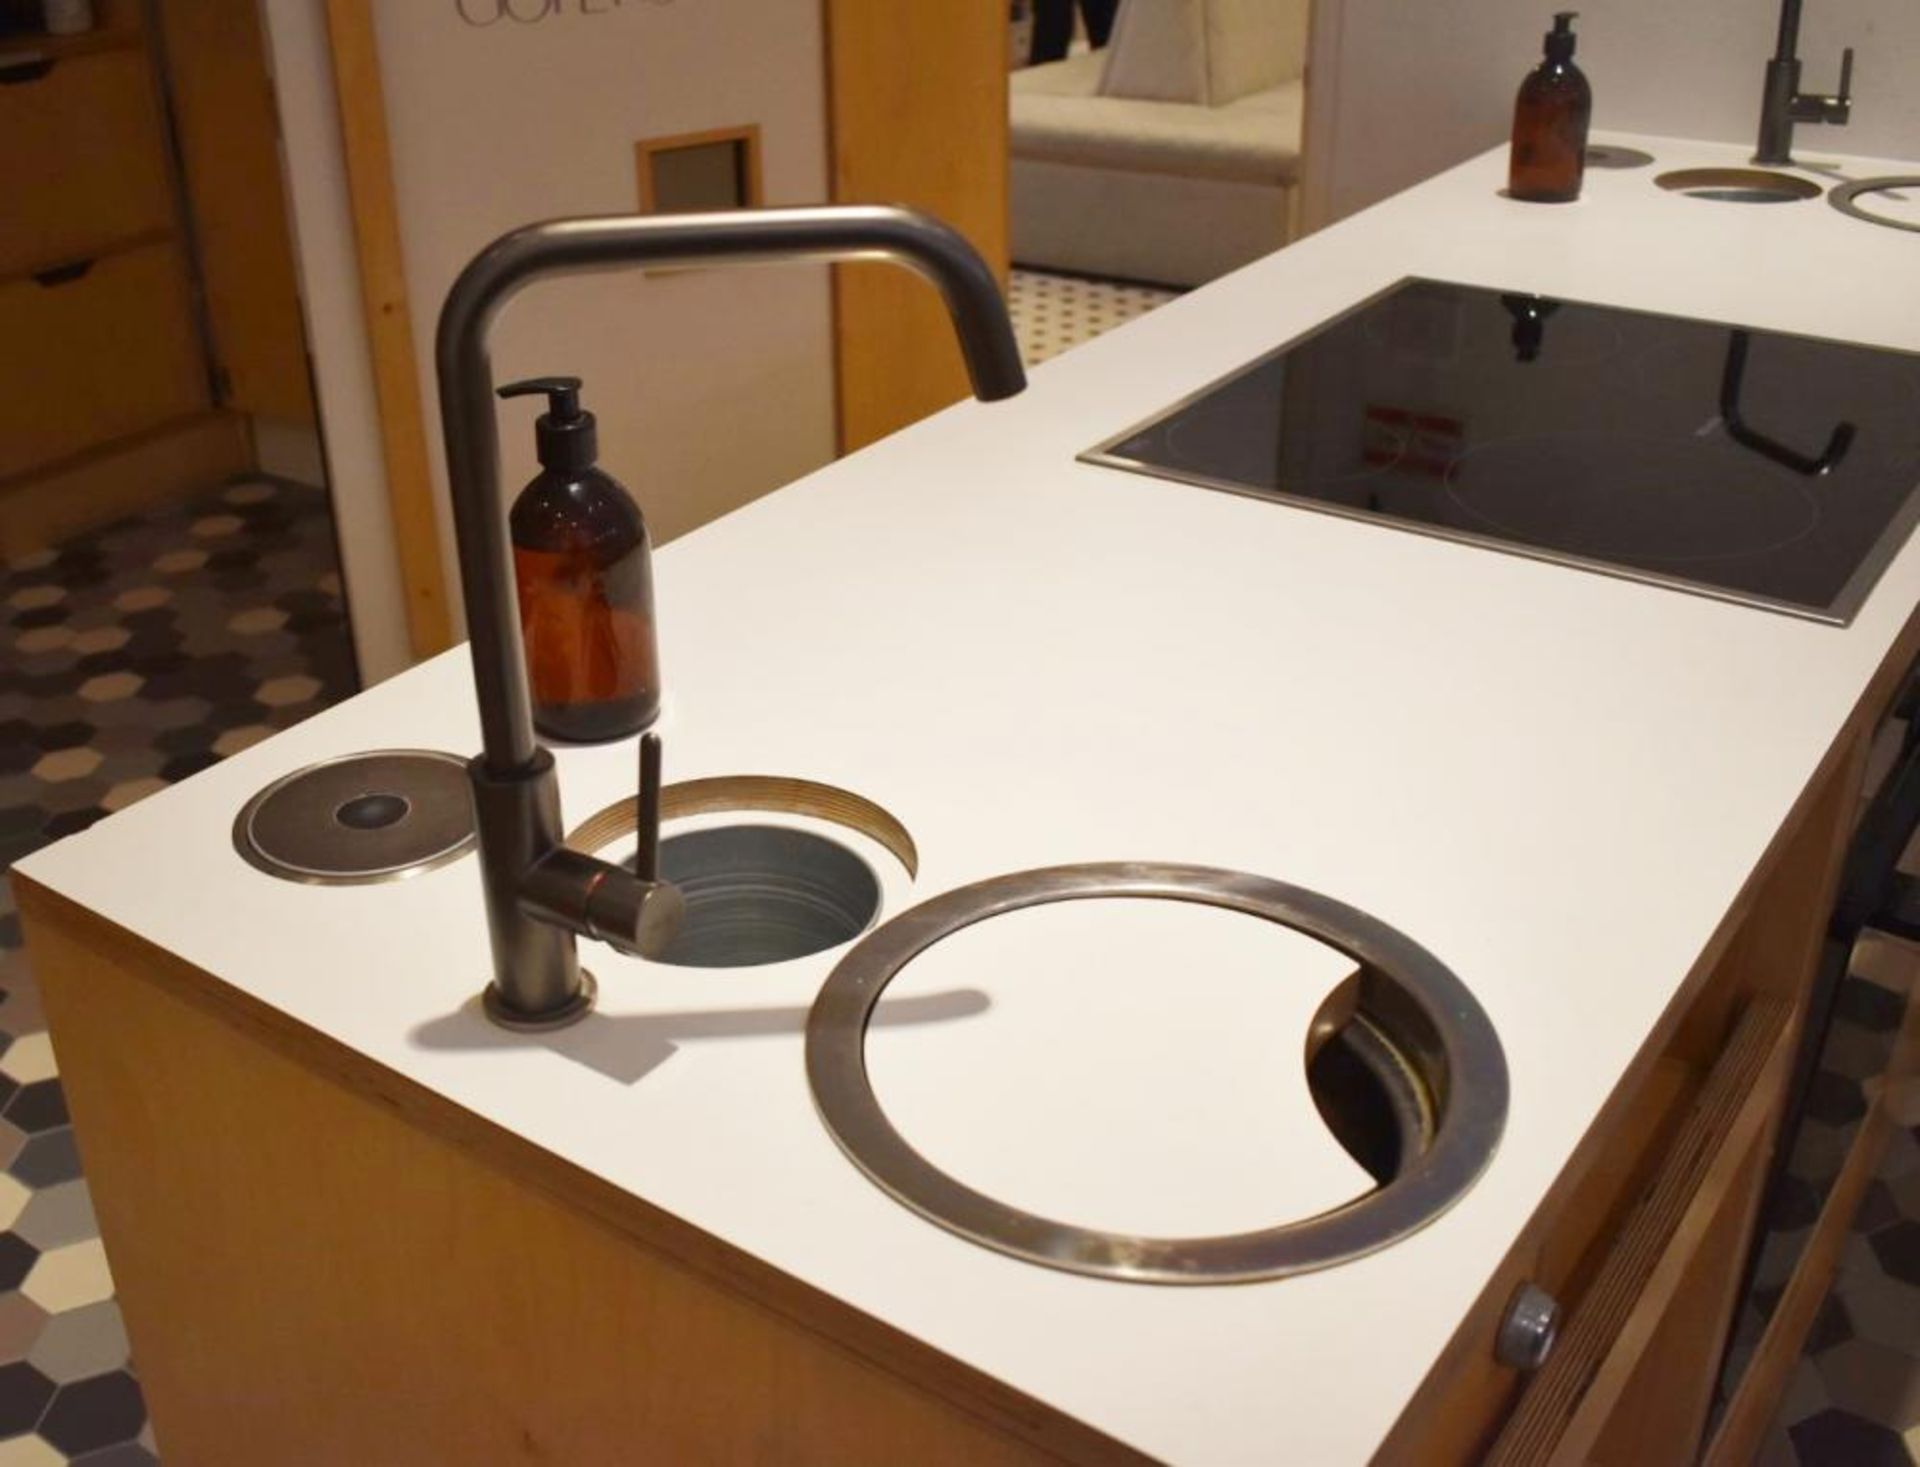 1 x Freestanding Kitchen Unit With Miele Oven and Ceramic Hob, Mixer Taps With Sink Bowls, Pop Up - Image 11 of 21